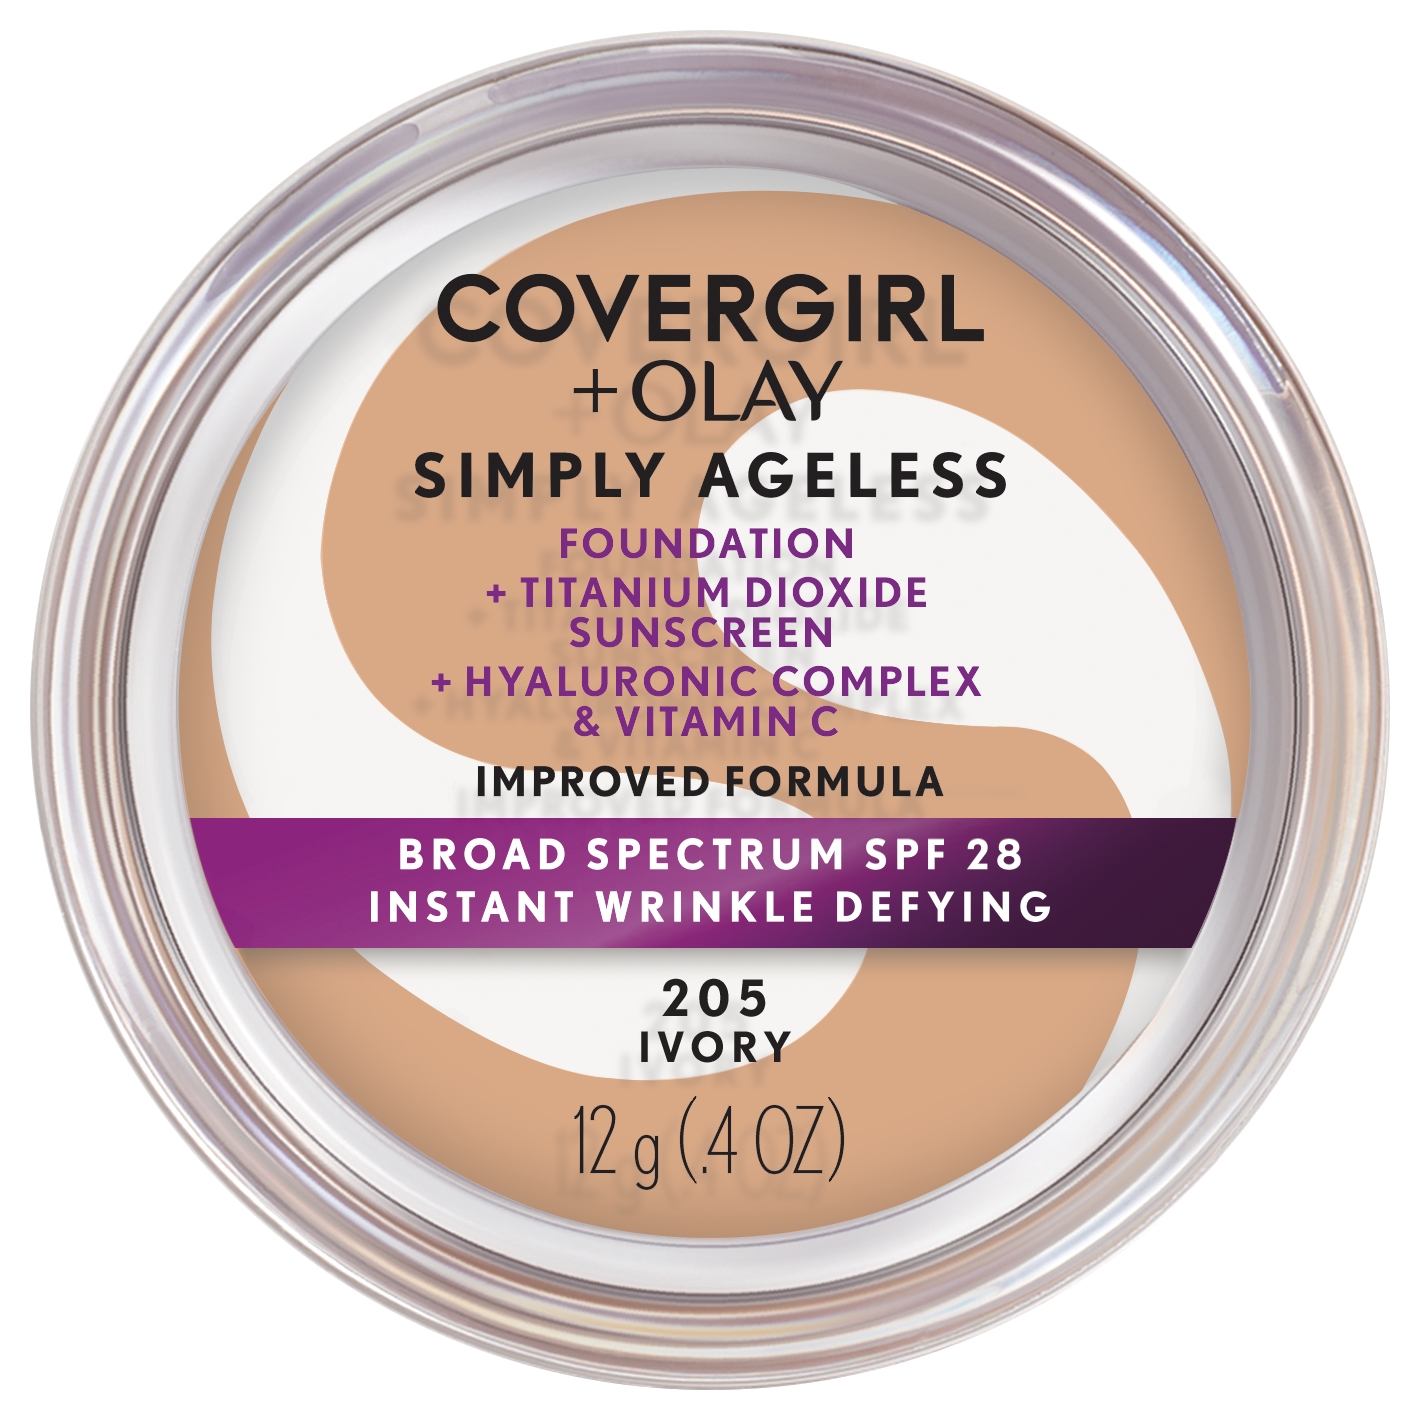 COVERGIRL + OLAY Simply Ageless Instant Wrinkle-Defying Foundation with SPF 28, Ivory, 0.44 oz - image 1 of 9